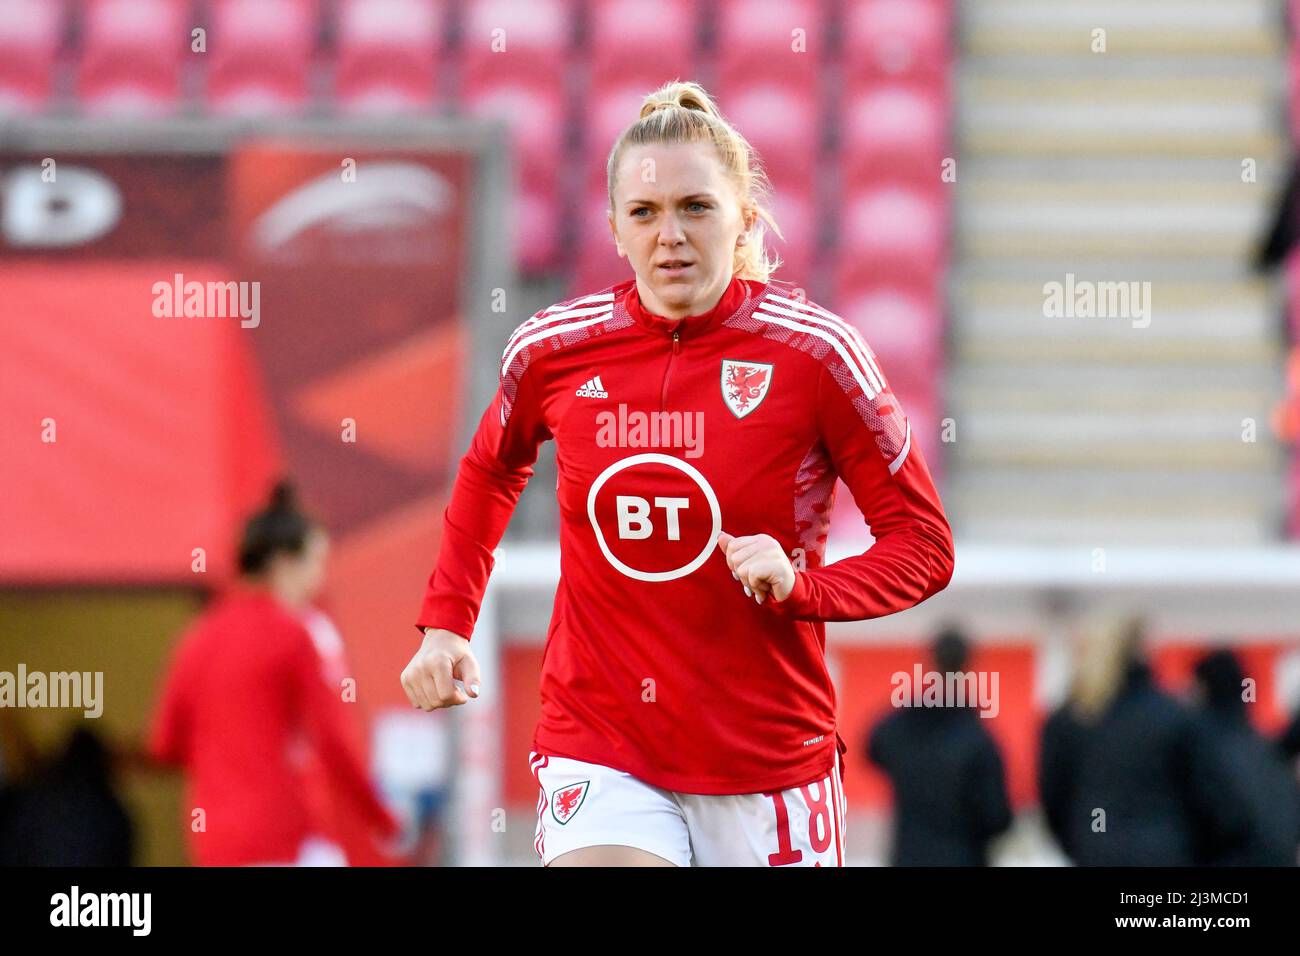 Llanelli, Wales. 8 April 2022. Ceri Holland of Wales Women during the pre-match warm-up before the FIFA Women's World Cup Qualifier Group I match between Wales Women and France Women at Parc y Scarlets in Llanelli, Wales, UK on 8 April 2022. Credit: Duncan Thomas/Majestic Media. Stock Photo